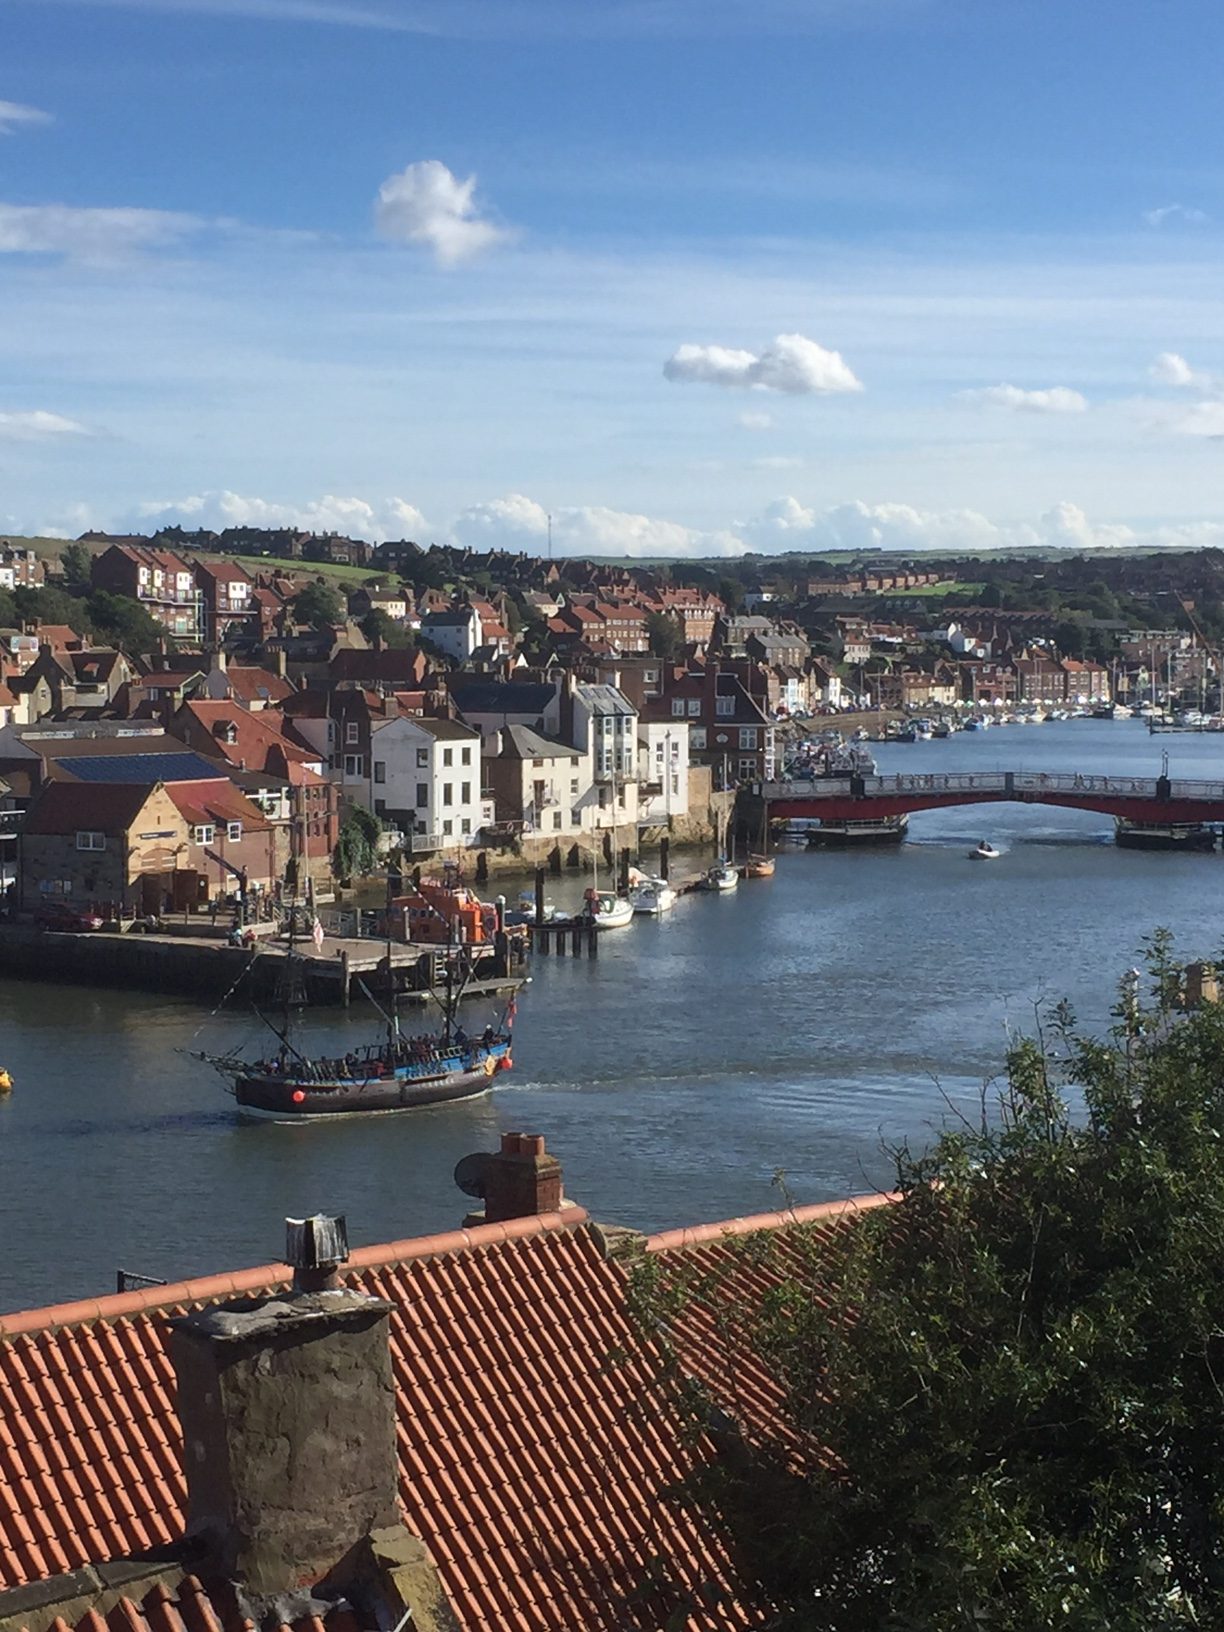 Whitby Harbour - the swing bridge and the pirate ship.